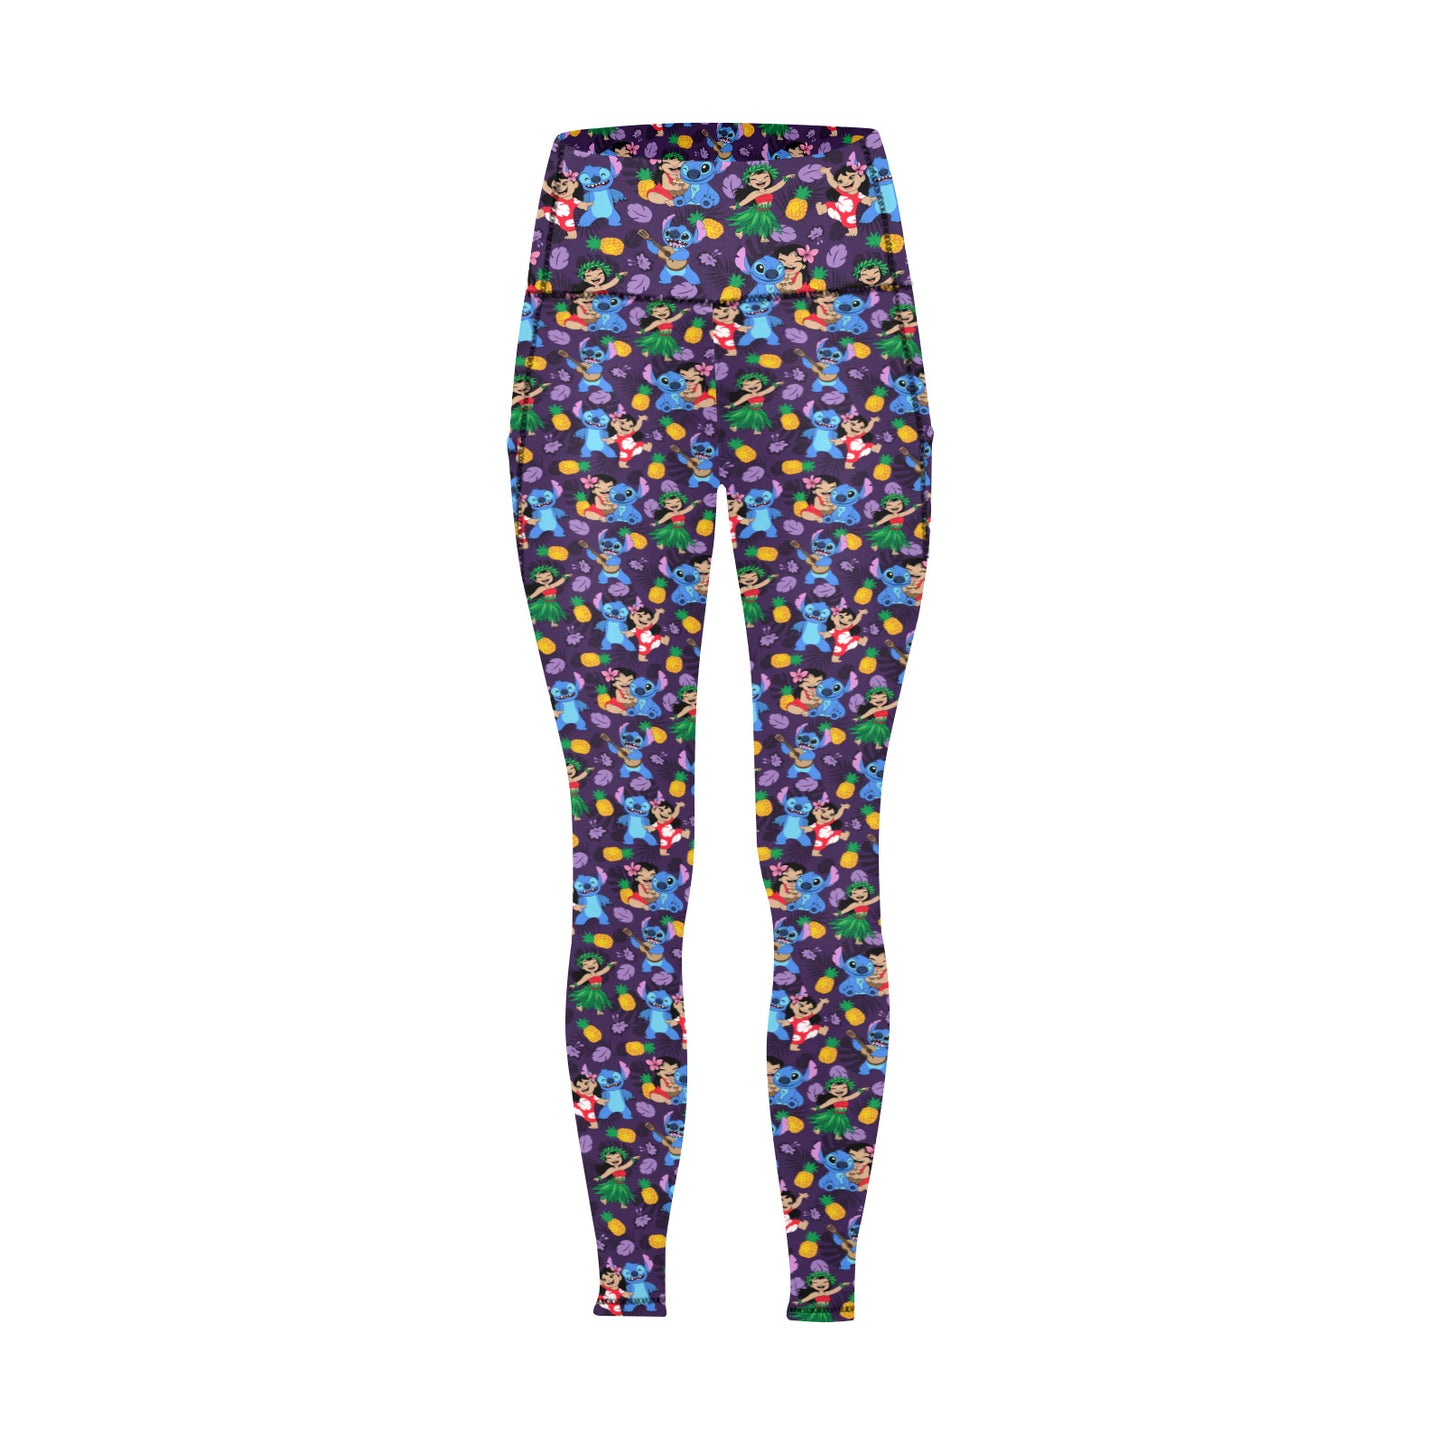 Island Friends Women's Athletic Leggings With Pockets